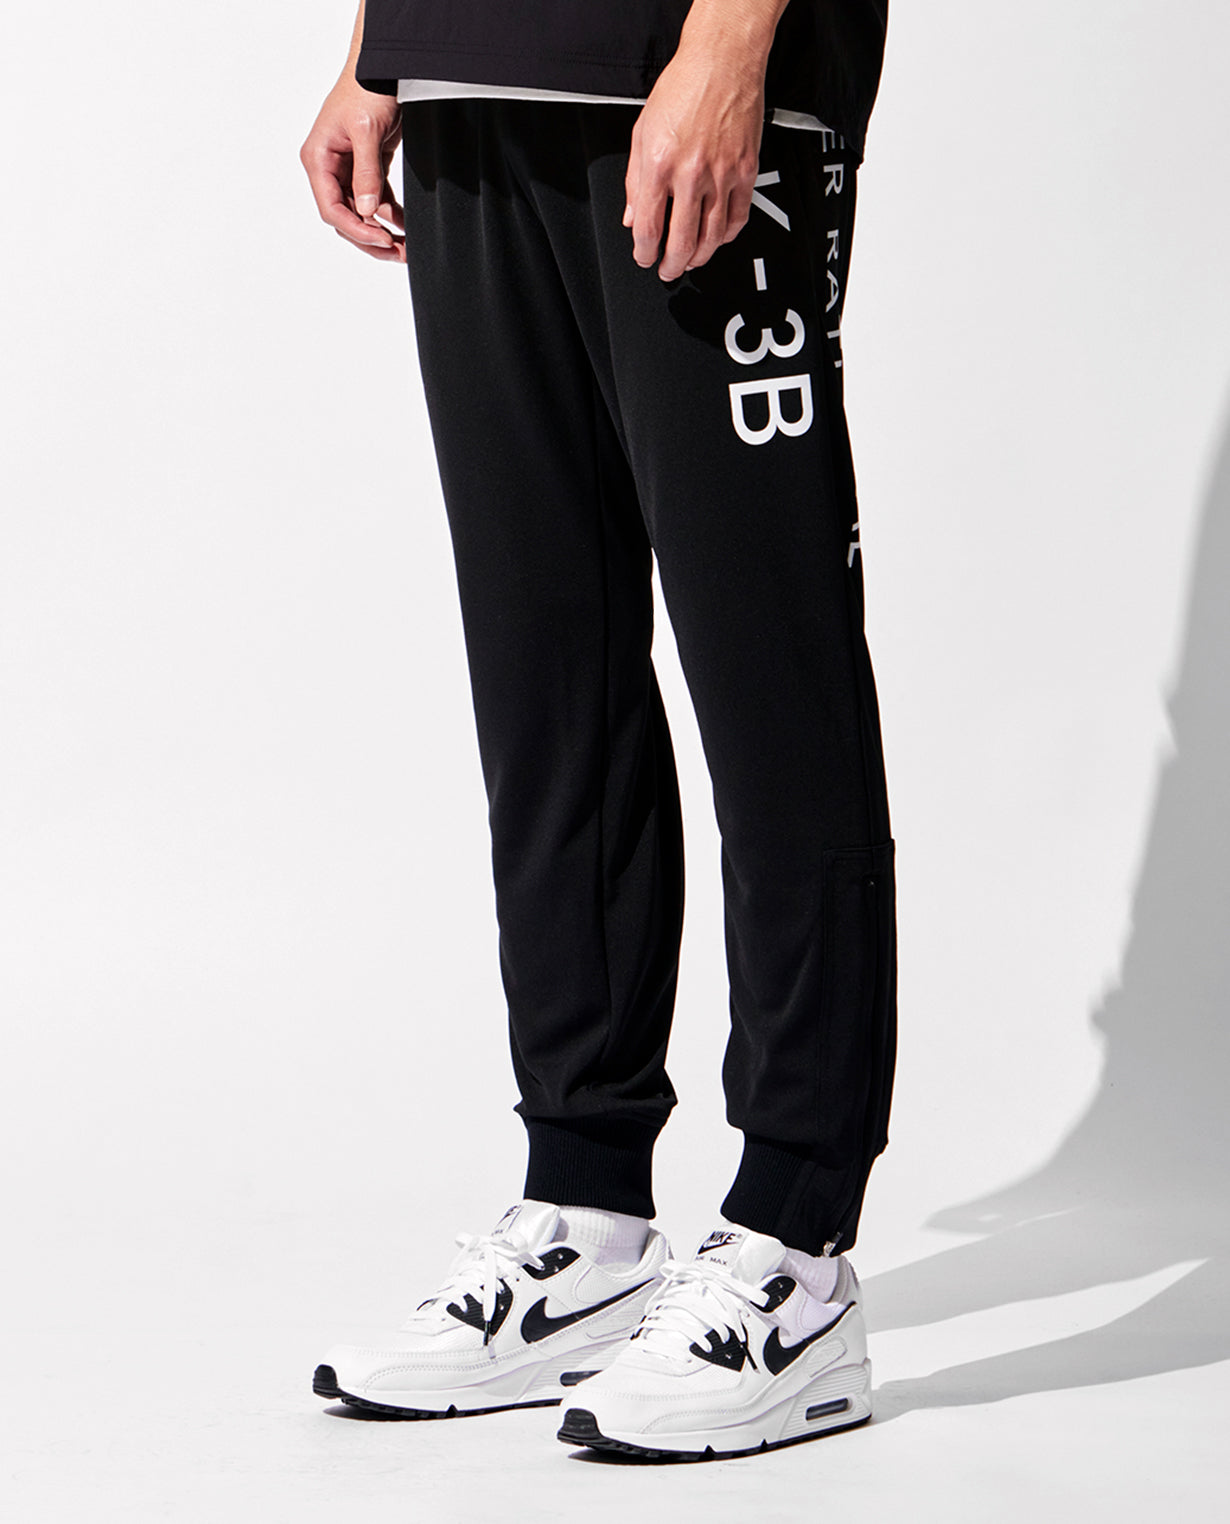 [115_G Graphic Jogger (Black)] Apology for sold out on official website and notice of in-store sales